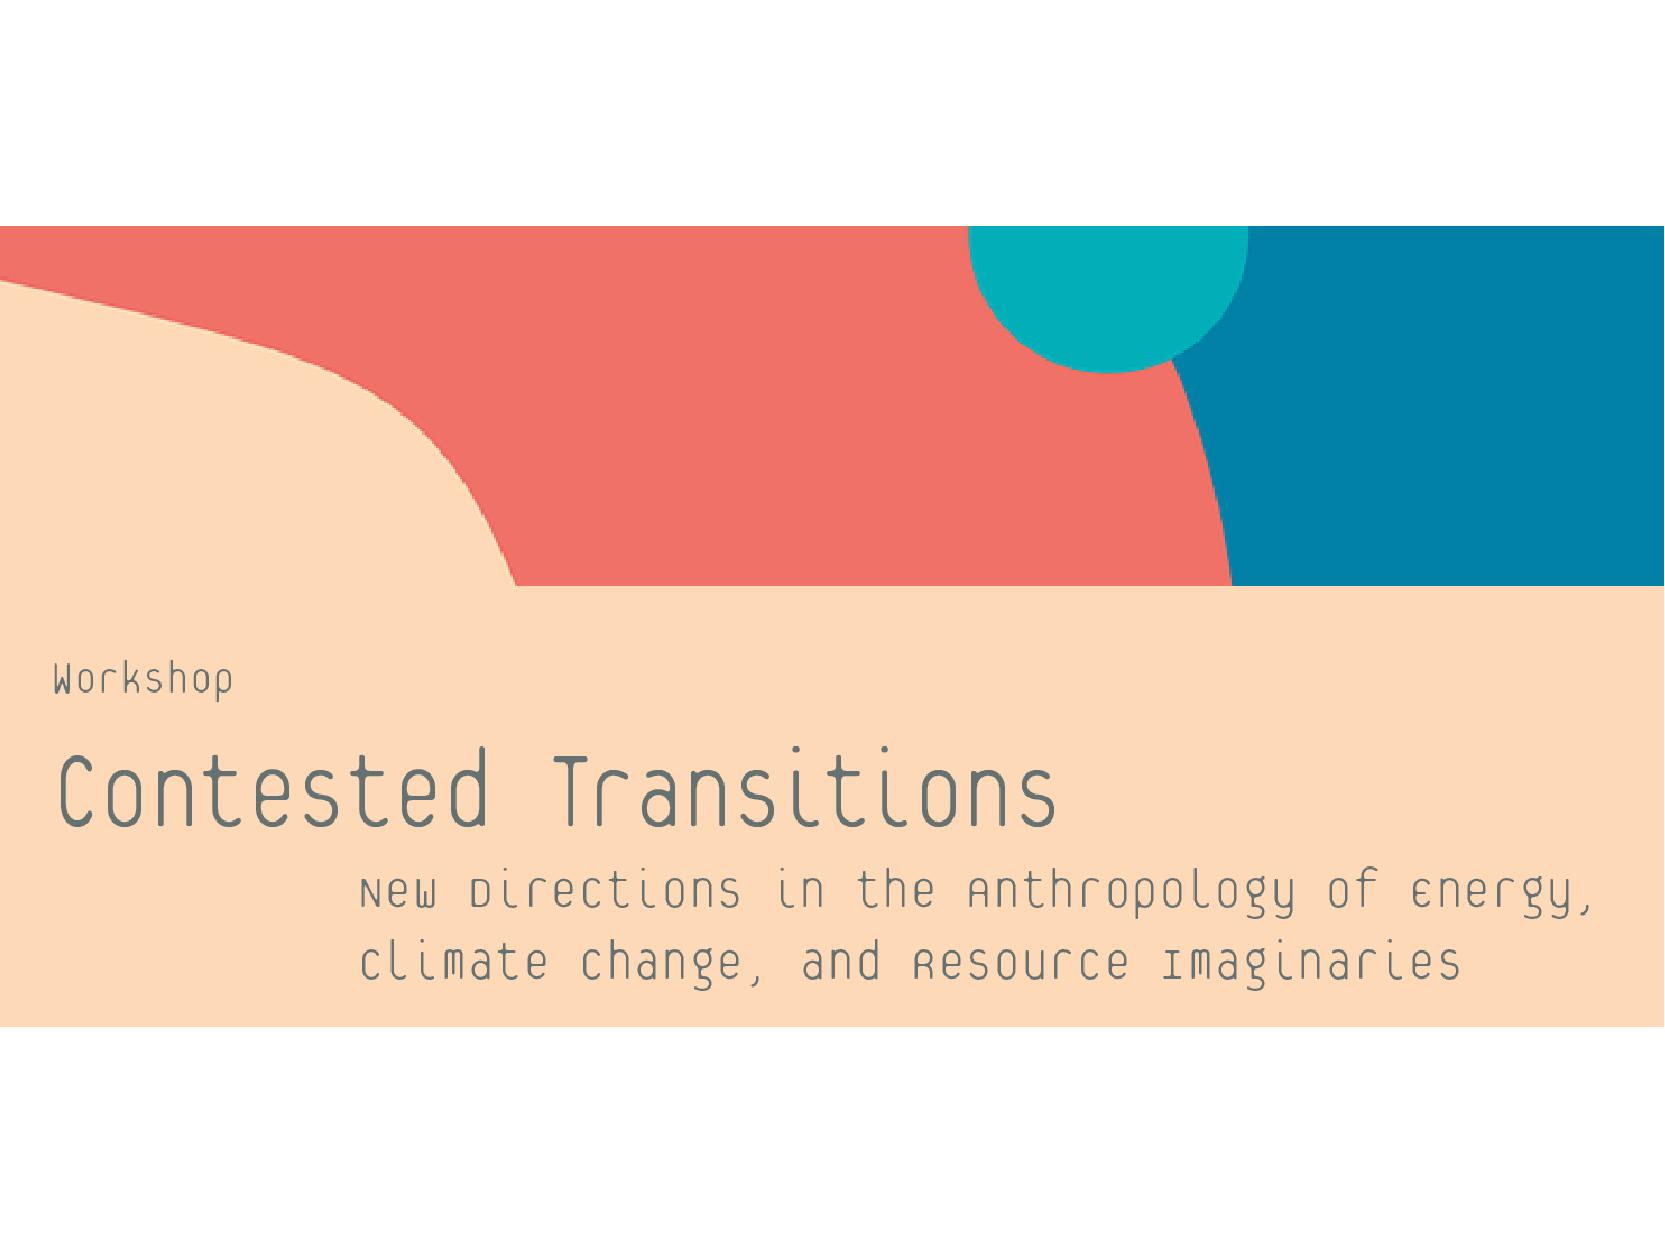 Contested Transitions - New Directions in the Anthropology of Energy, Climate Change, and Resource Imaginaries